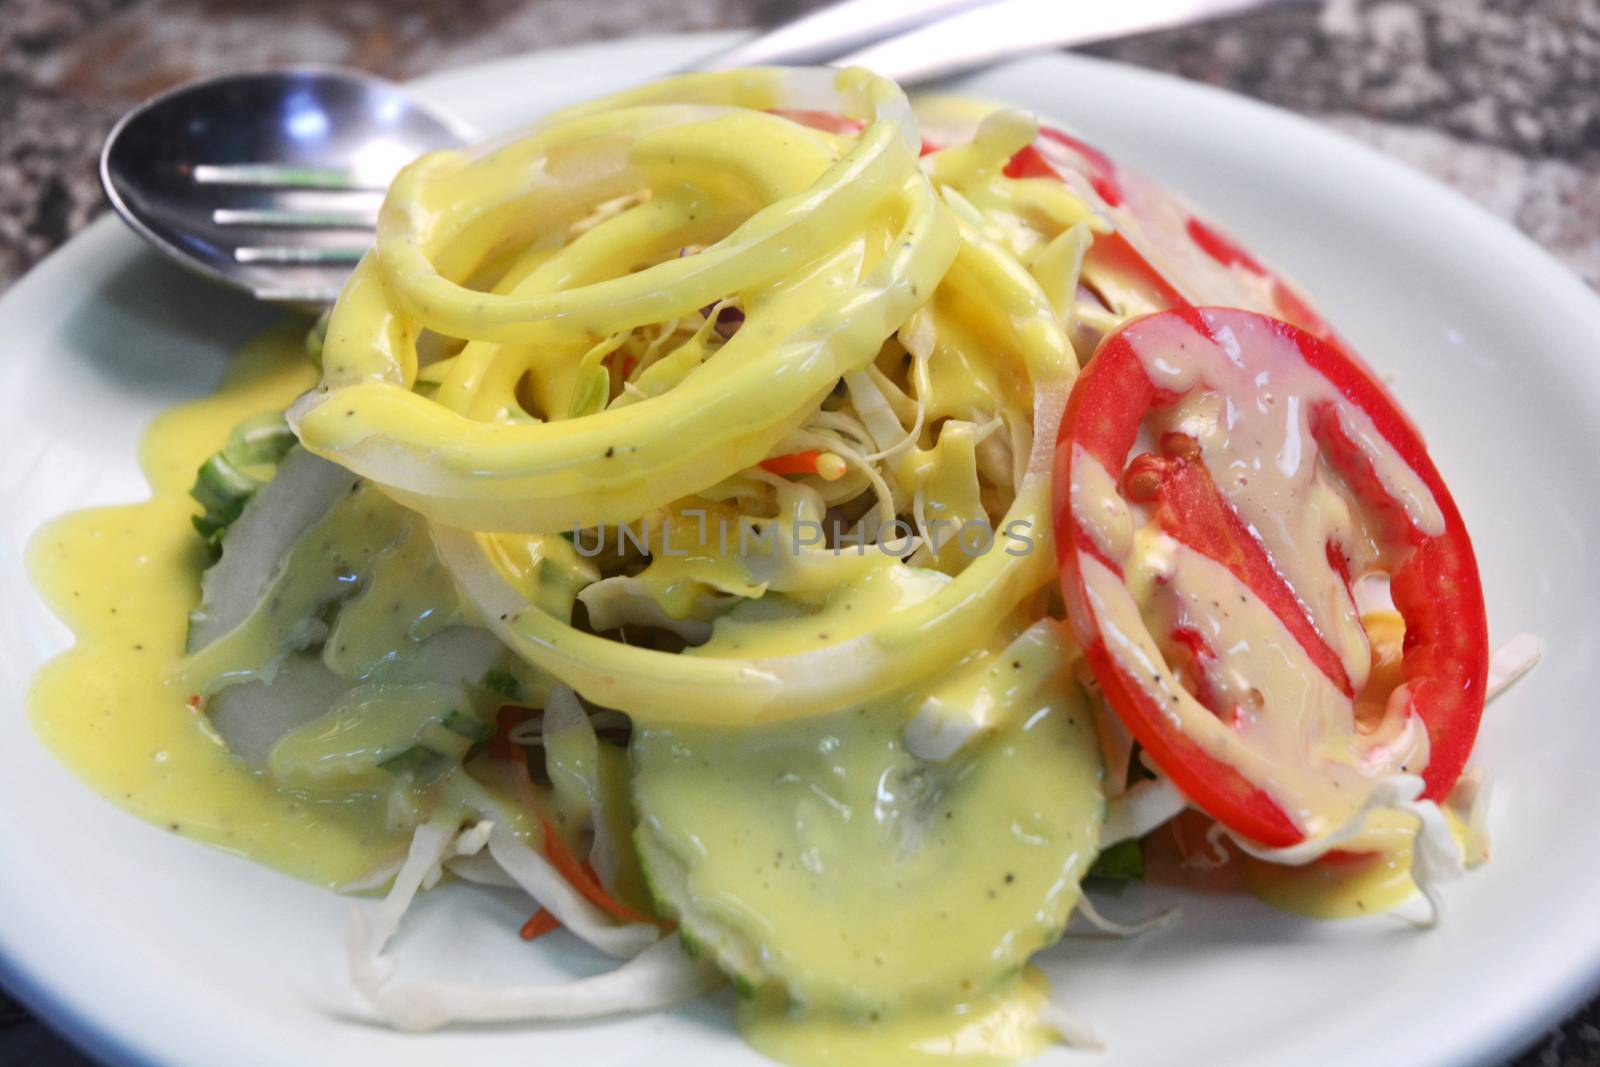 Salad topped with salad dressing by ideation90